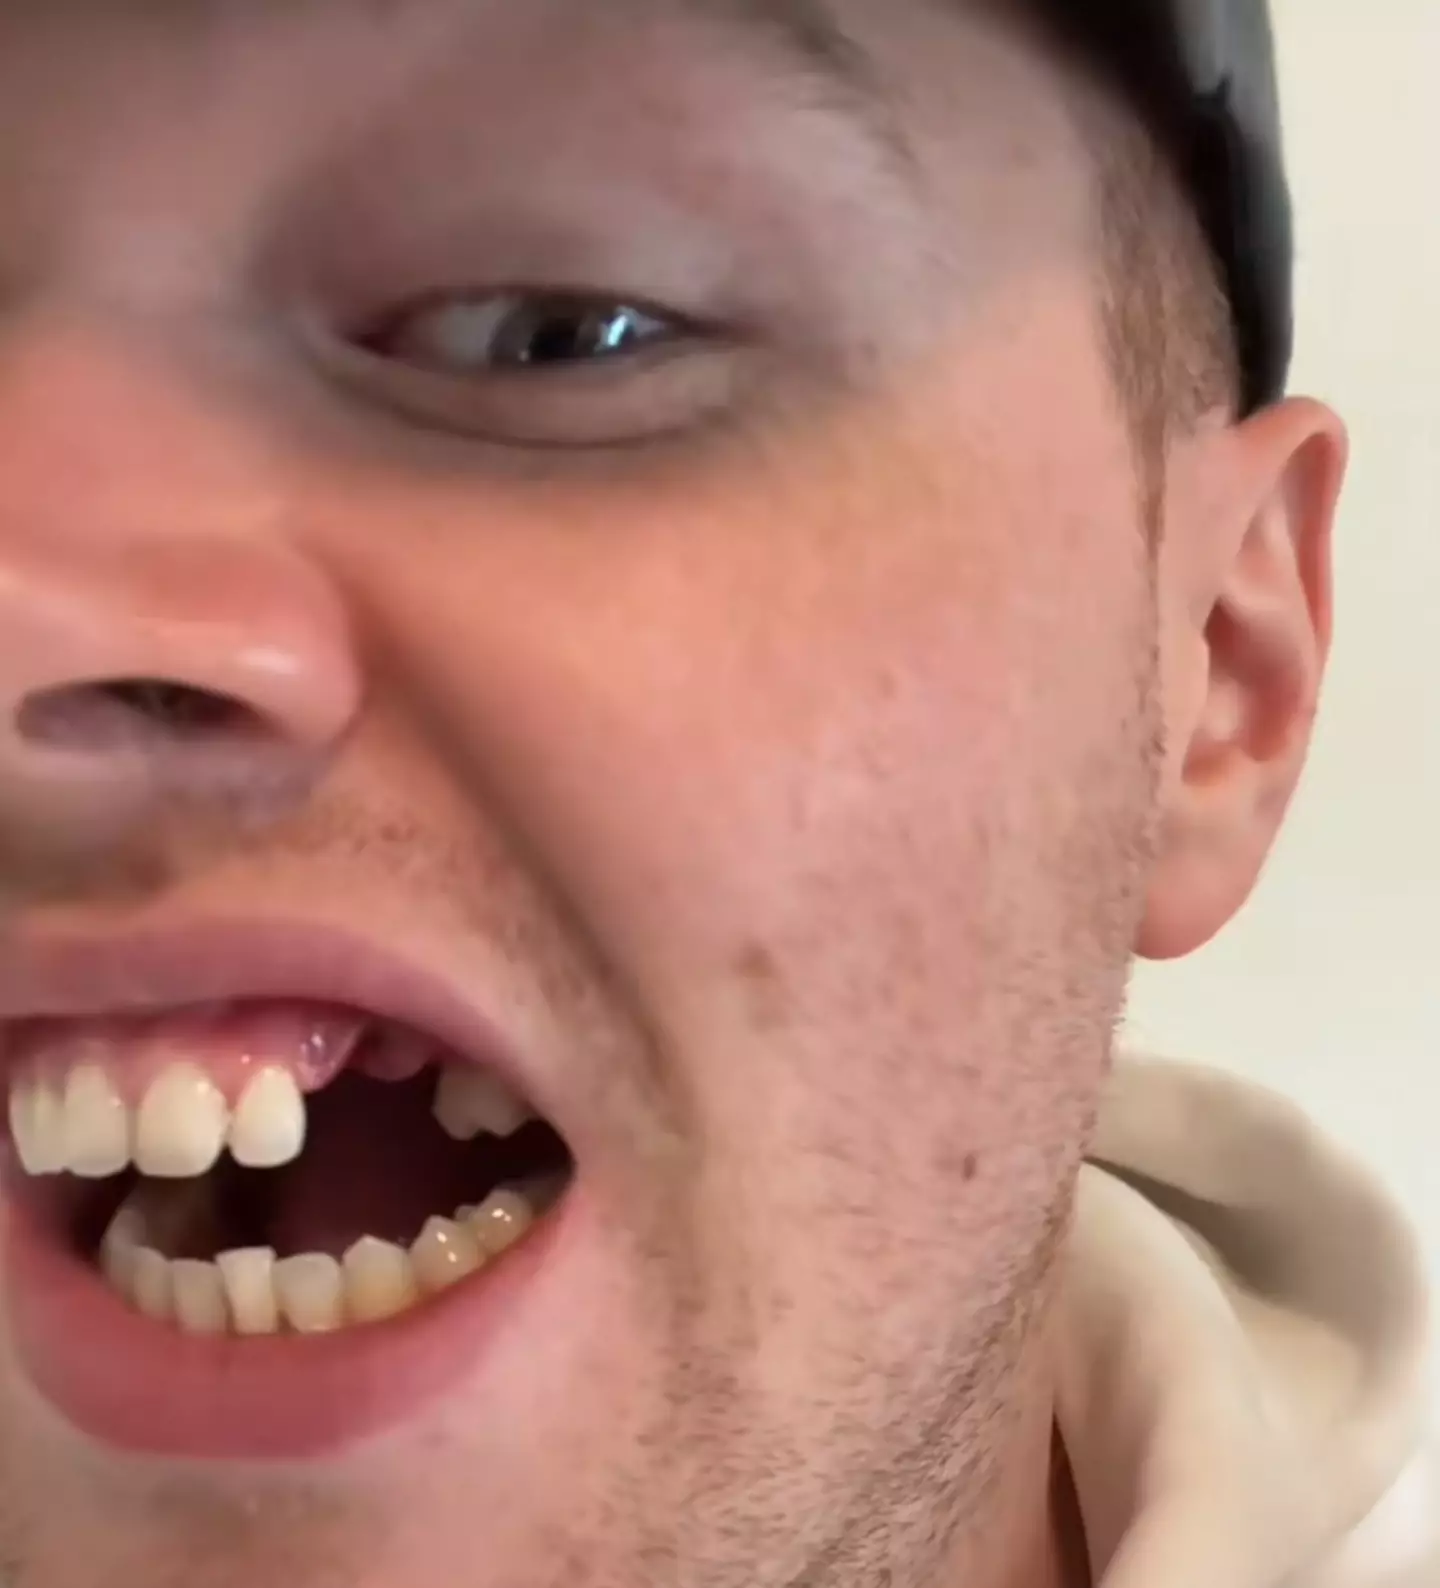 Christopher Scott says he lost his tooth as a result of using white Snus.